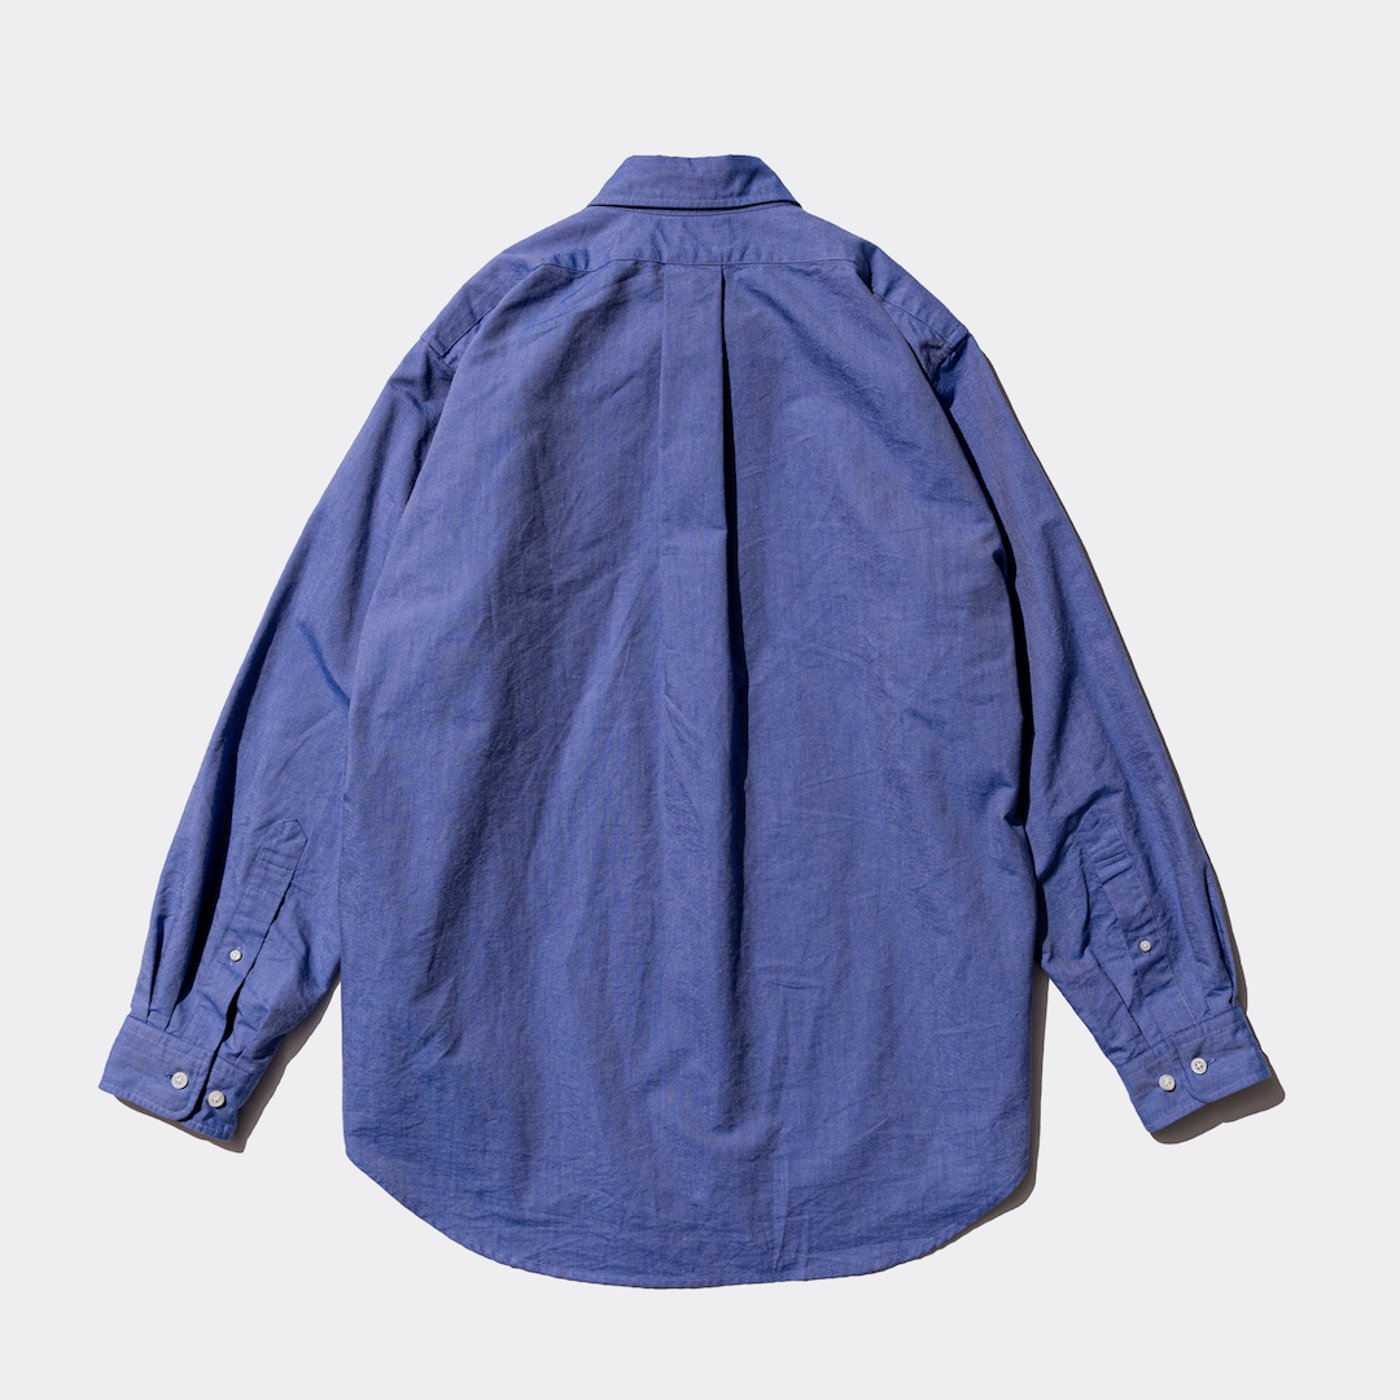 Unlikely * U24S-11-0003 Unlikely Button Down Shirts(3色展開)